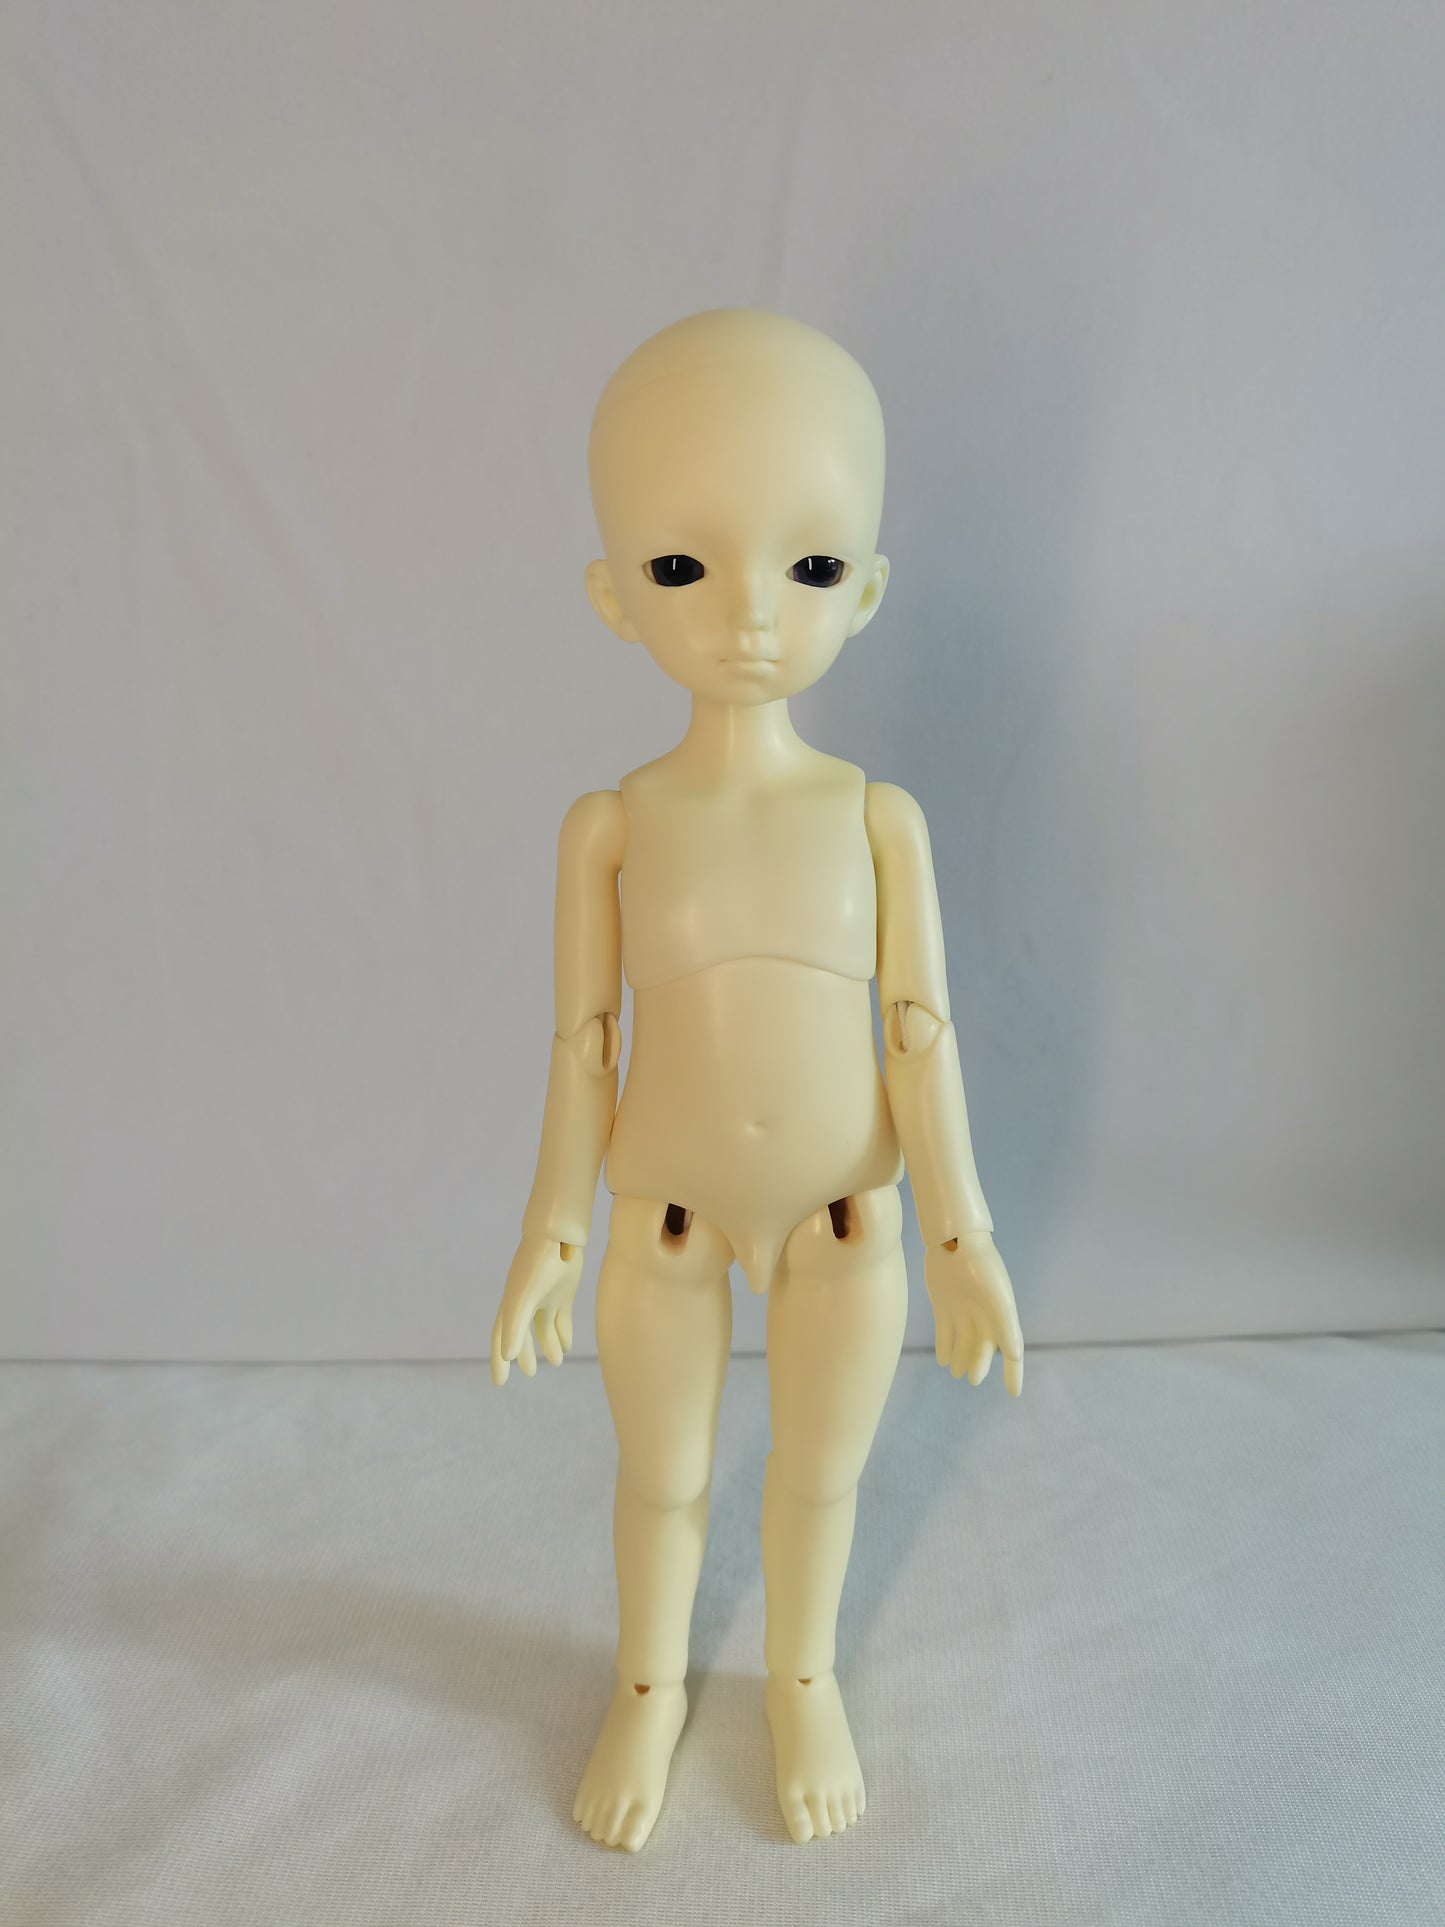 1/6 26cm doll in white skin with glass eyes